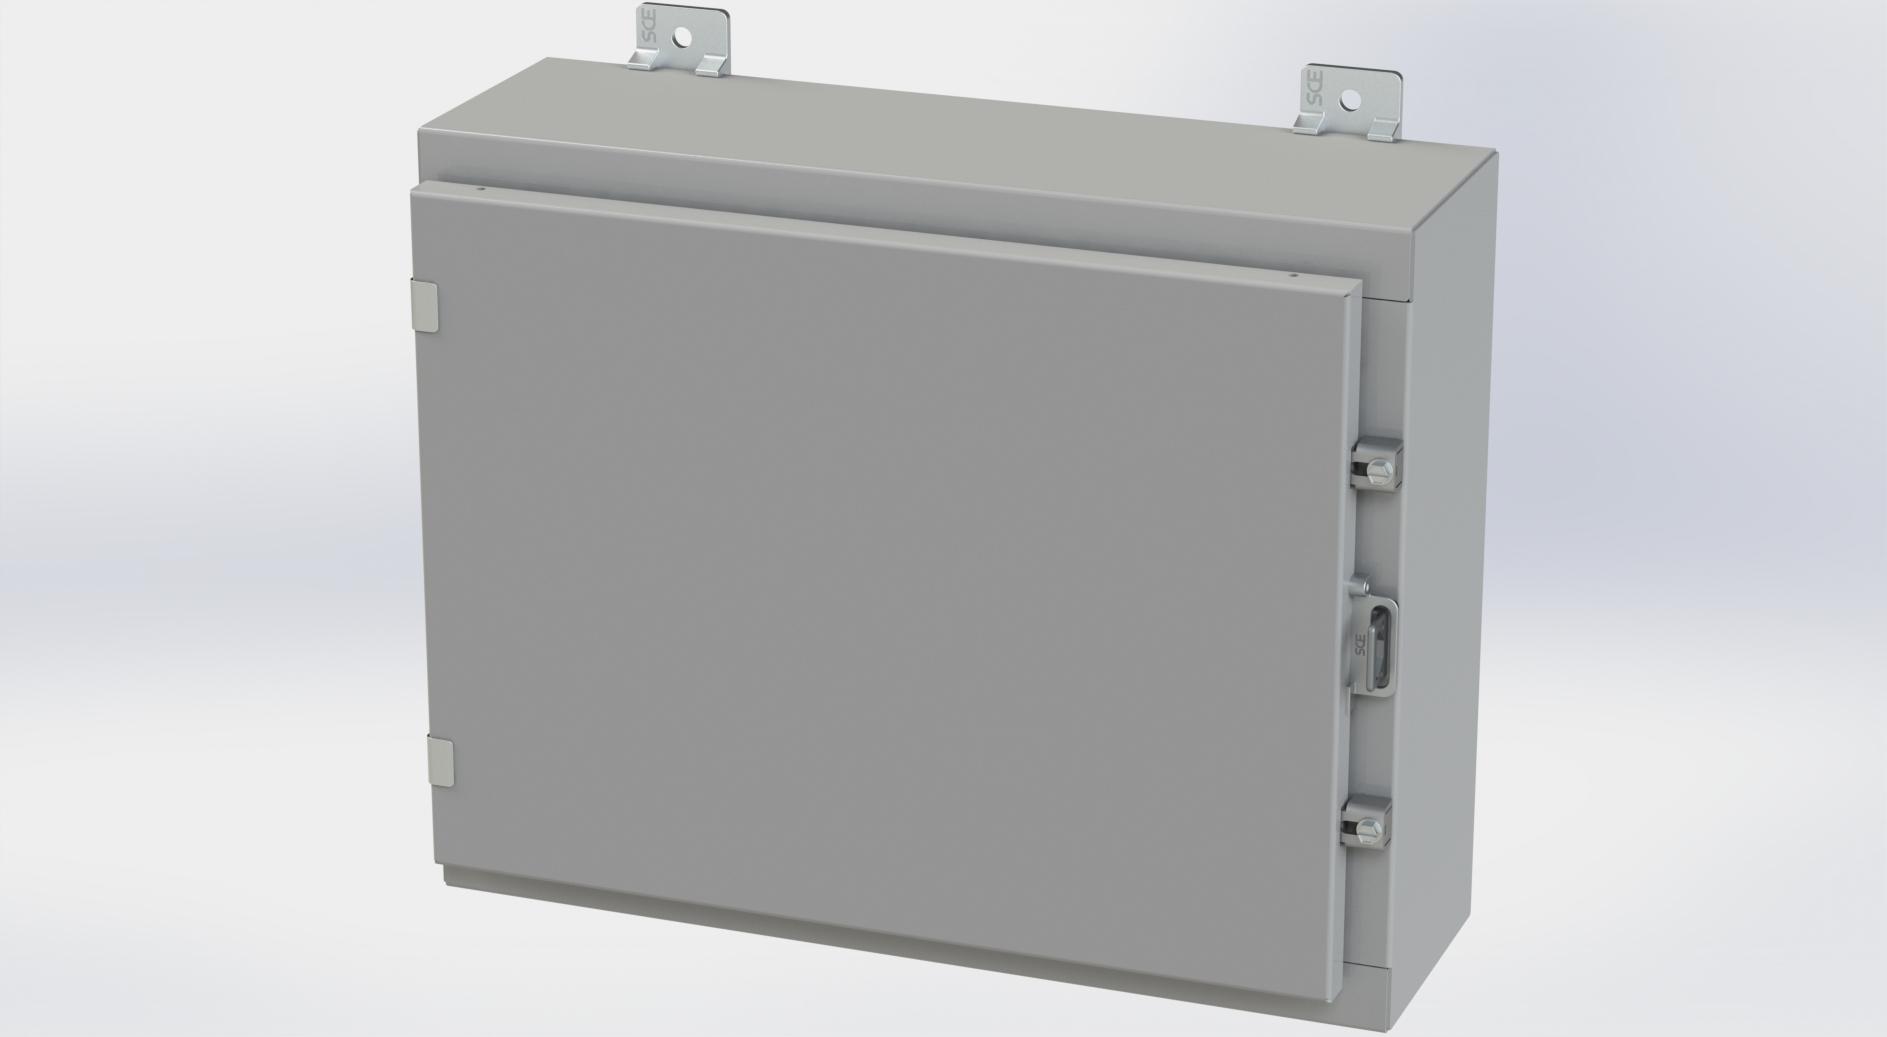 Saginaw Control SCE-16H2006LP Nema 4 LP Enclosure, Height:16.00", Width:20.00", Depth:6.00", ANSI-61 gray powder coating inside and out. Optional panels are powder coated white.